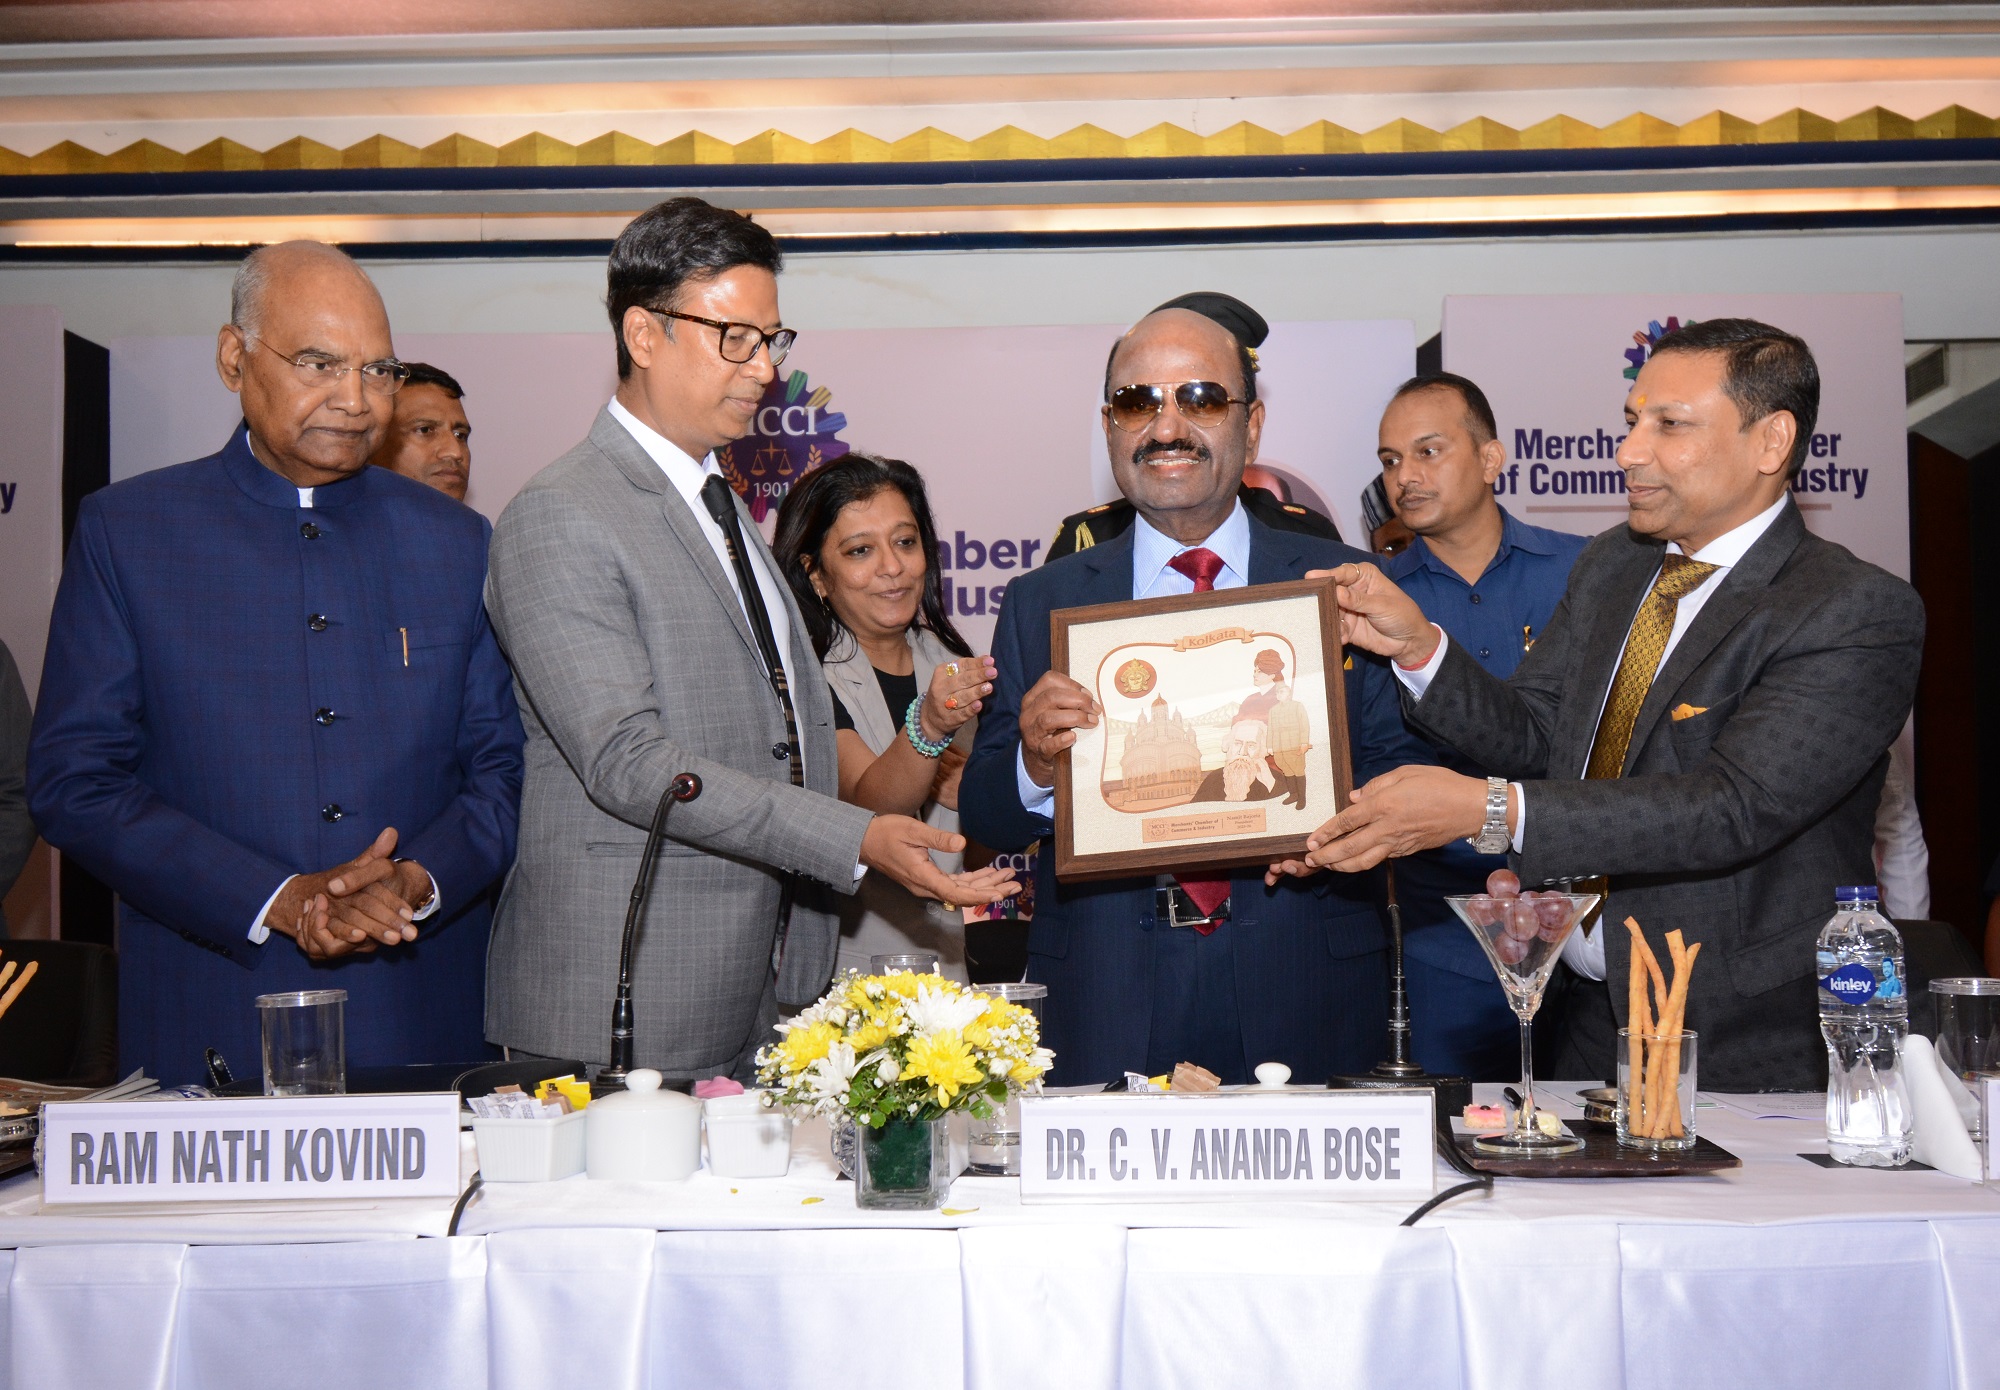 (L - R) :Shri Ram Nath Kovind, Hon'ble Former President of India, Shri Namit Bajoria, President, MCCI presenting a memento to Dr. C. V. Ananda Bose, Hon'ble Governor of West Bengal and Shri Lalit Beriwala, Sr. Vice President, MCCI at the Exclusive Session on 'Ethos of Indian Constitution : Unity in Diversity' held today at The Park Hotel, Kolkata.